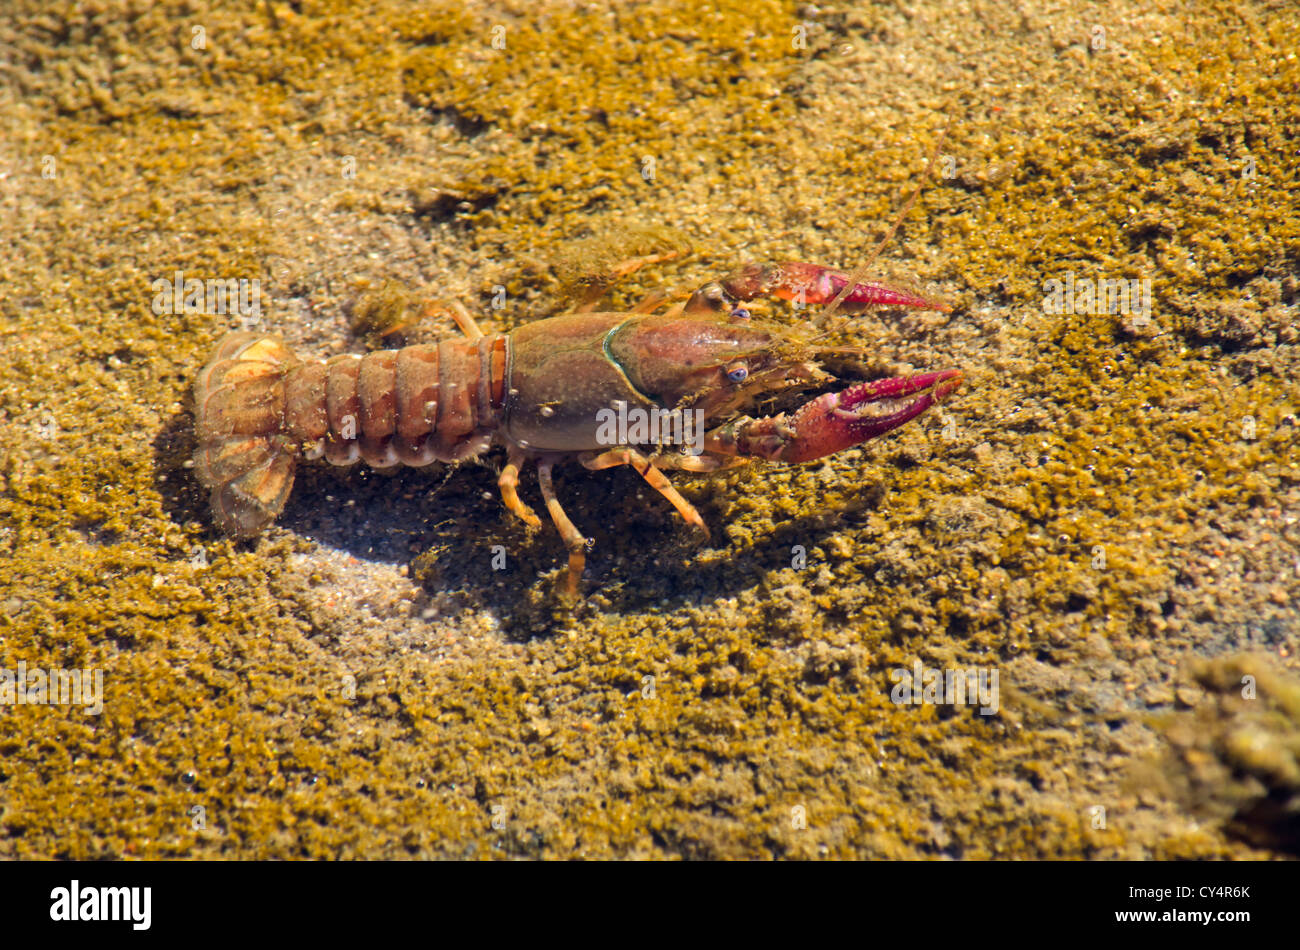 Calico (papershell crayfish) (Orconectes immunis) at water's edge of pond, Bluff Lake Nature Preserve, Colorado US. Stock Photo